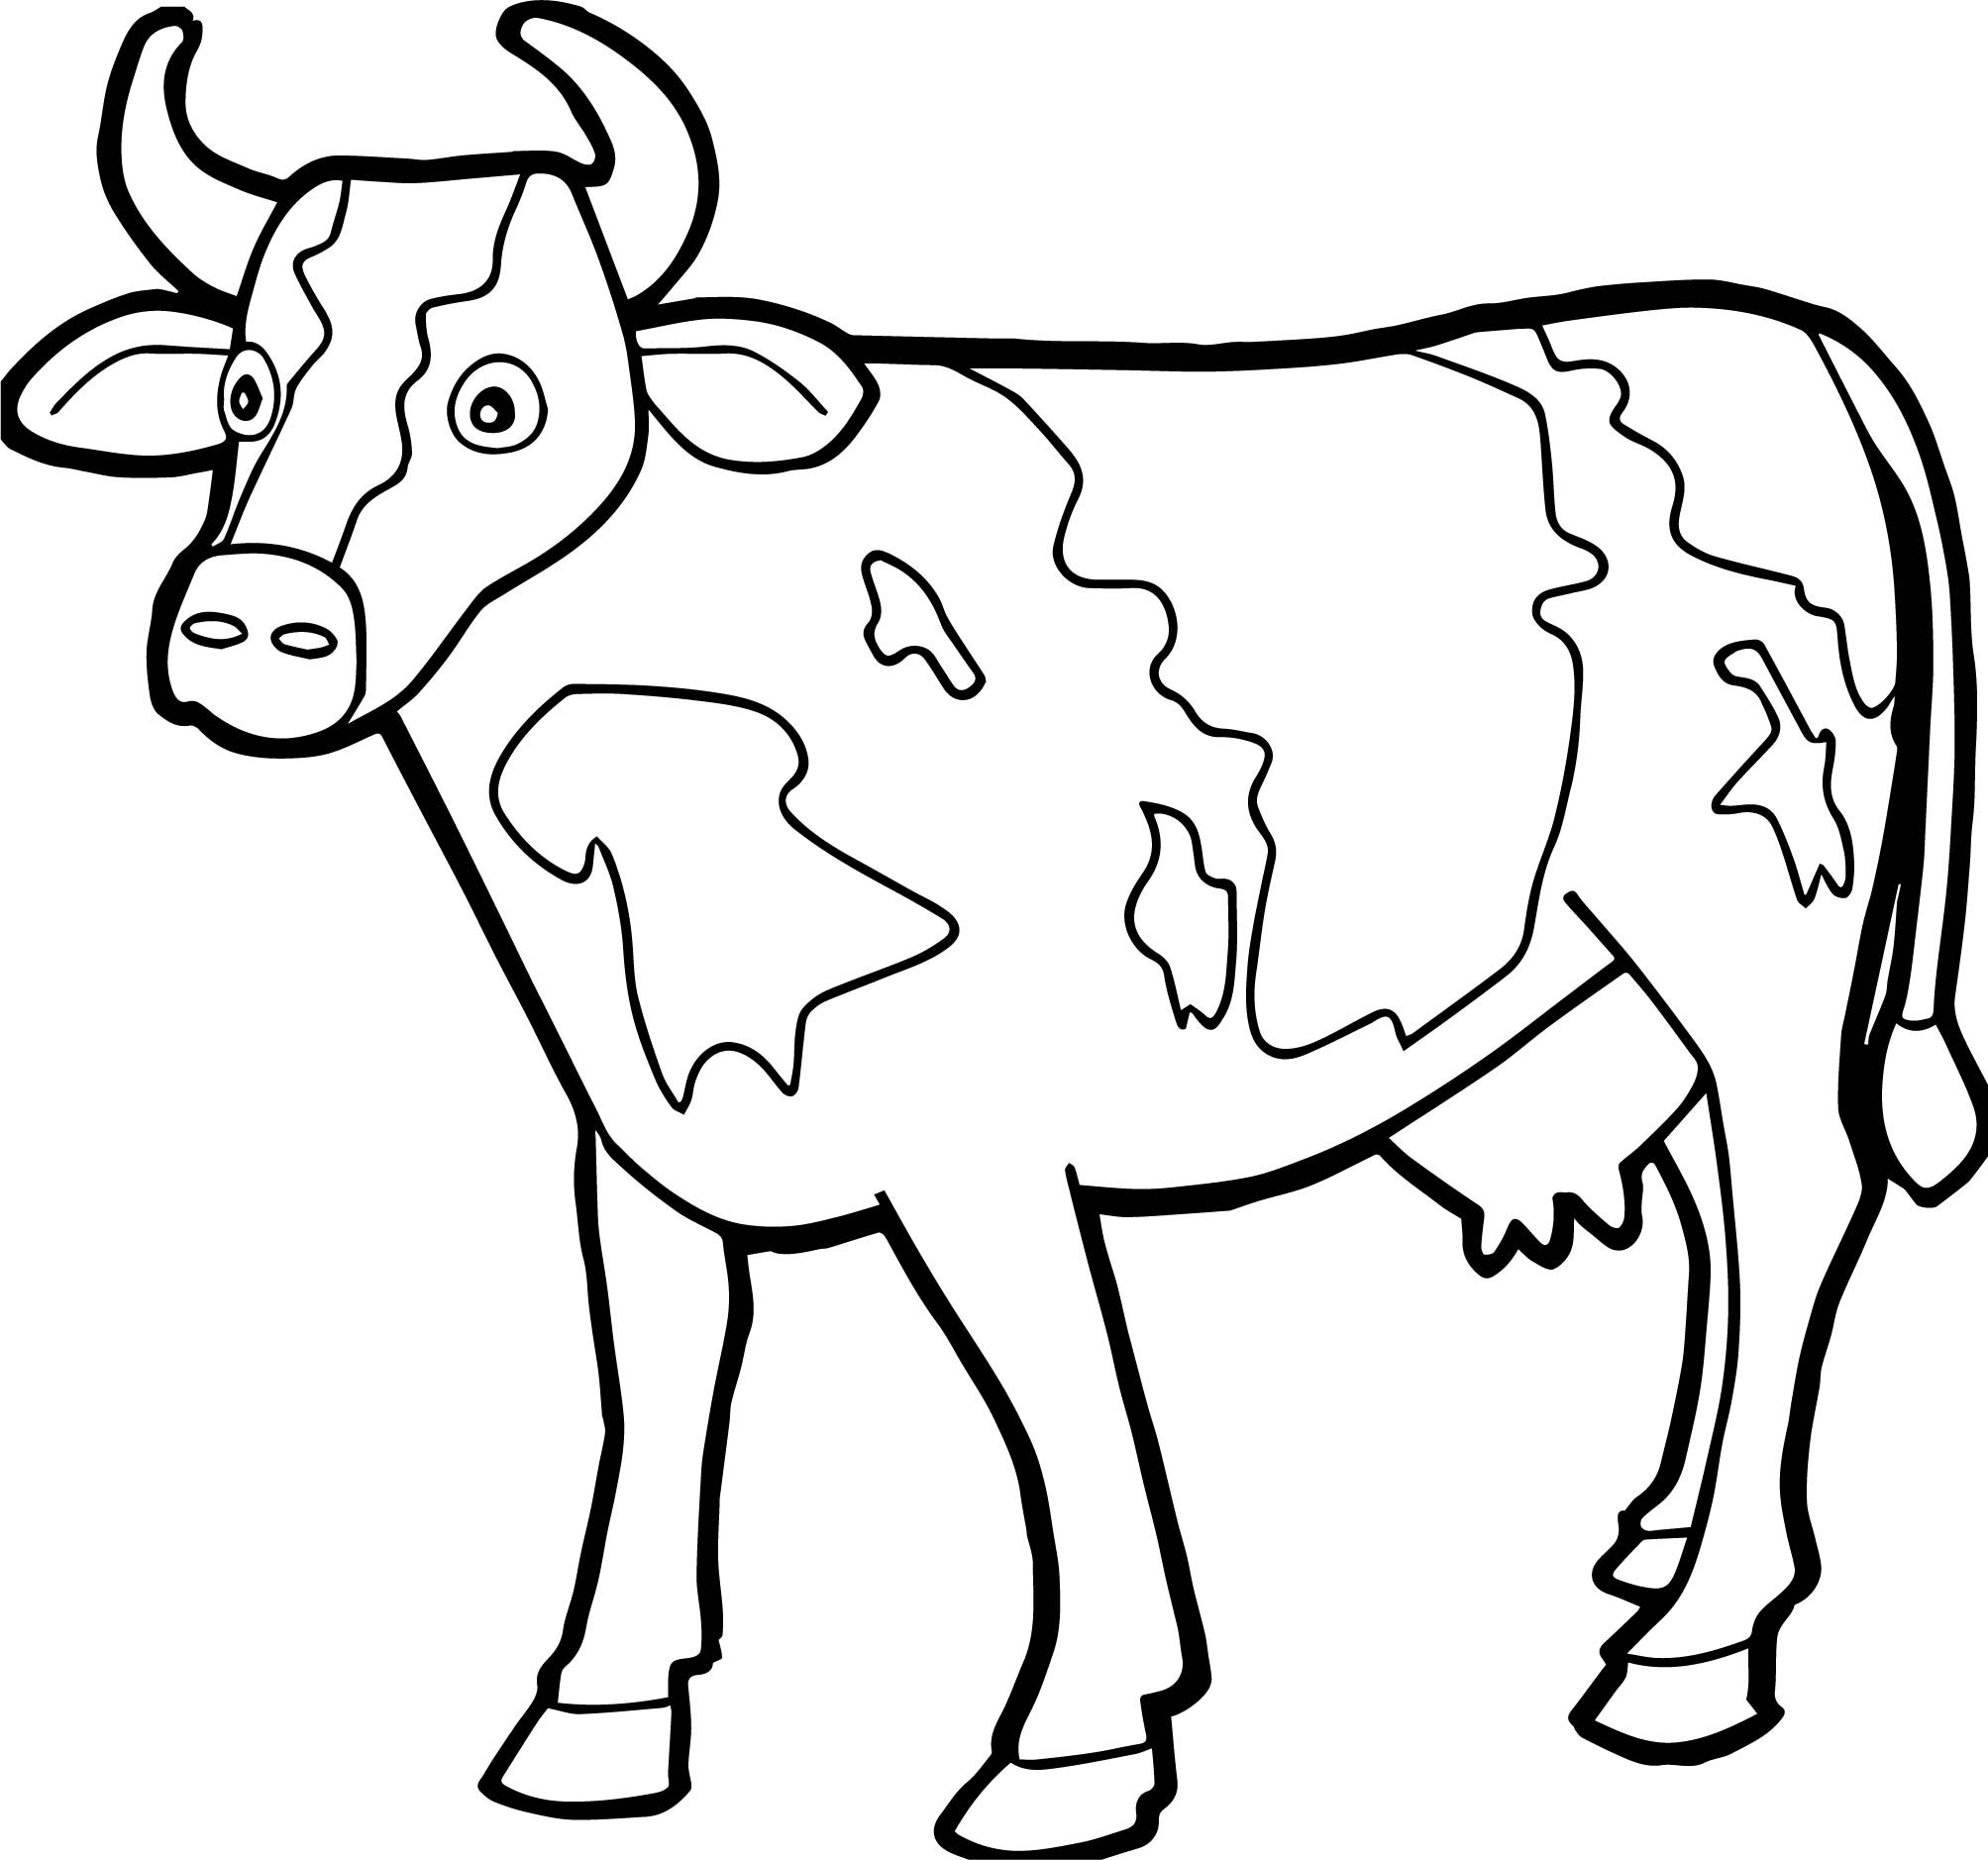 2007x1878 Coloring Pages Baby Cow Free Draw To Color.